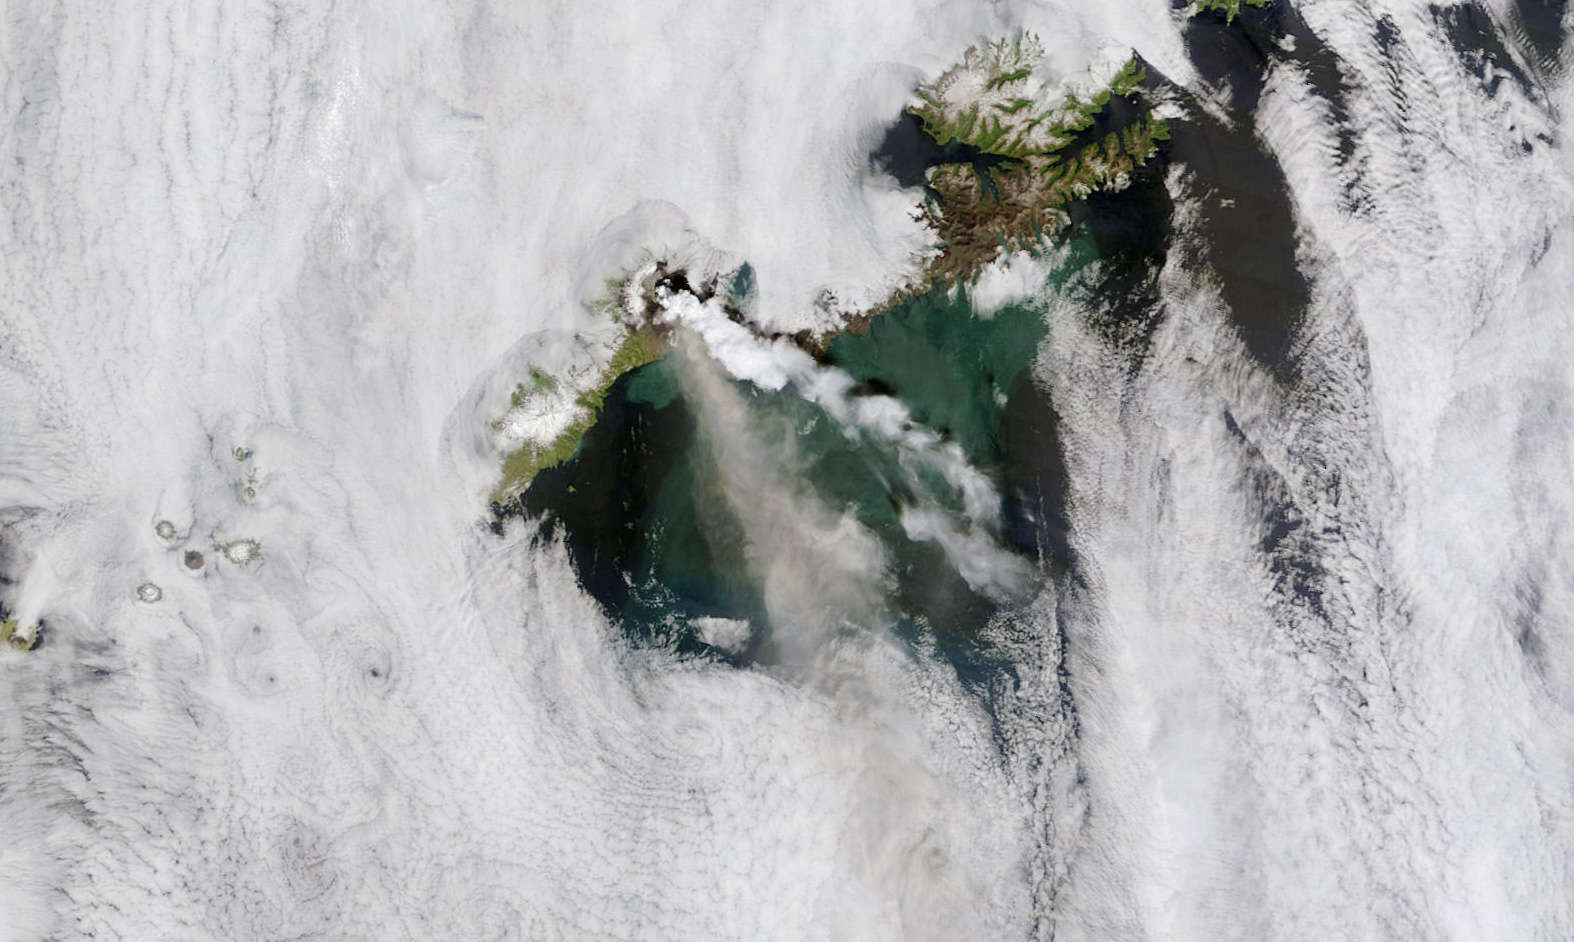 The 2008 eruption of Okmok seen from space by NASA’s Terra satellite. The steam cloud (white) is well over 100 km long, and an ash/gas cloud can be seen below it. Credit: NASA image courtesy MODIS Rapid Response team